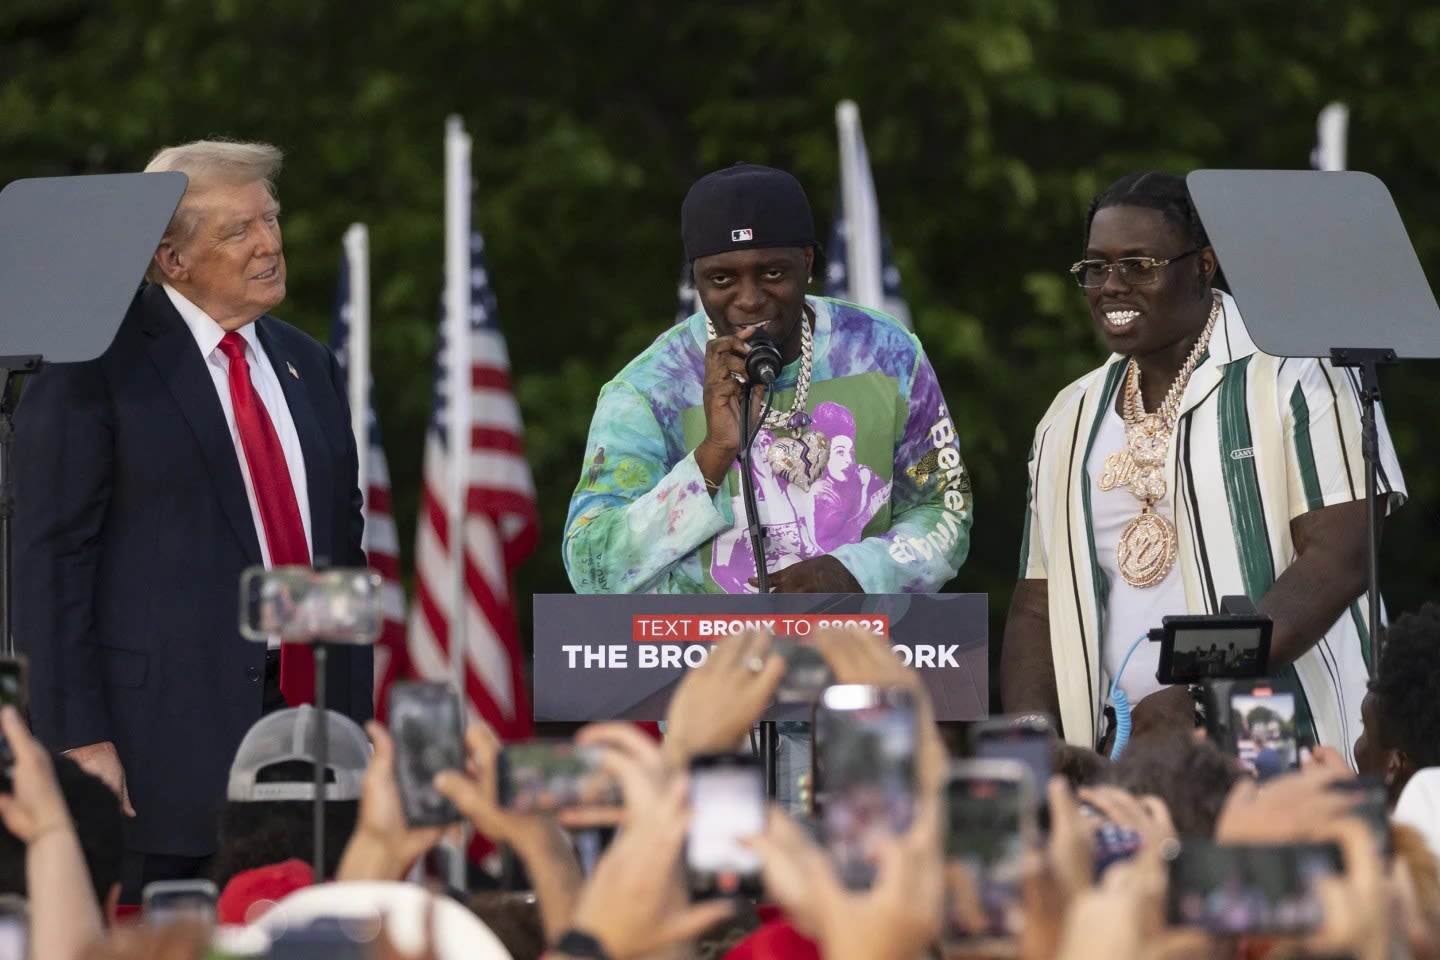 Rappers Sheff G, Sleepy Hallow stump for Trump in the Bronx as they face a felony gang case